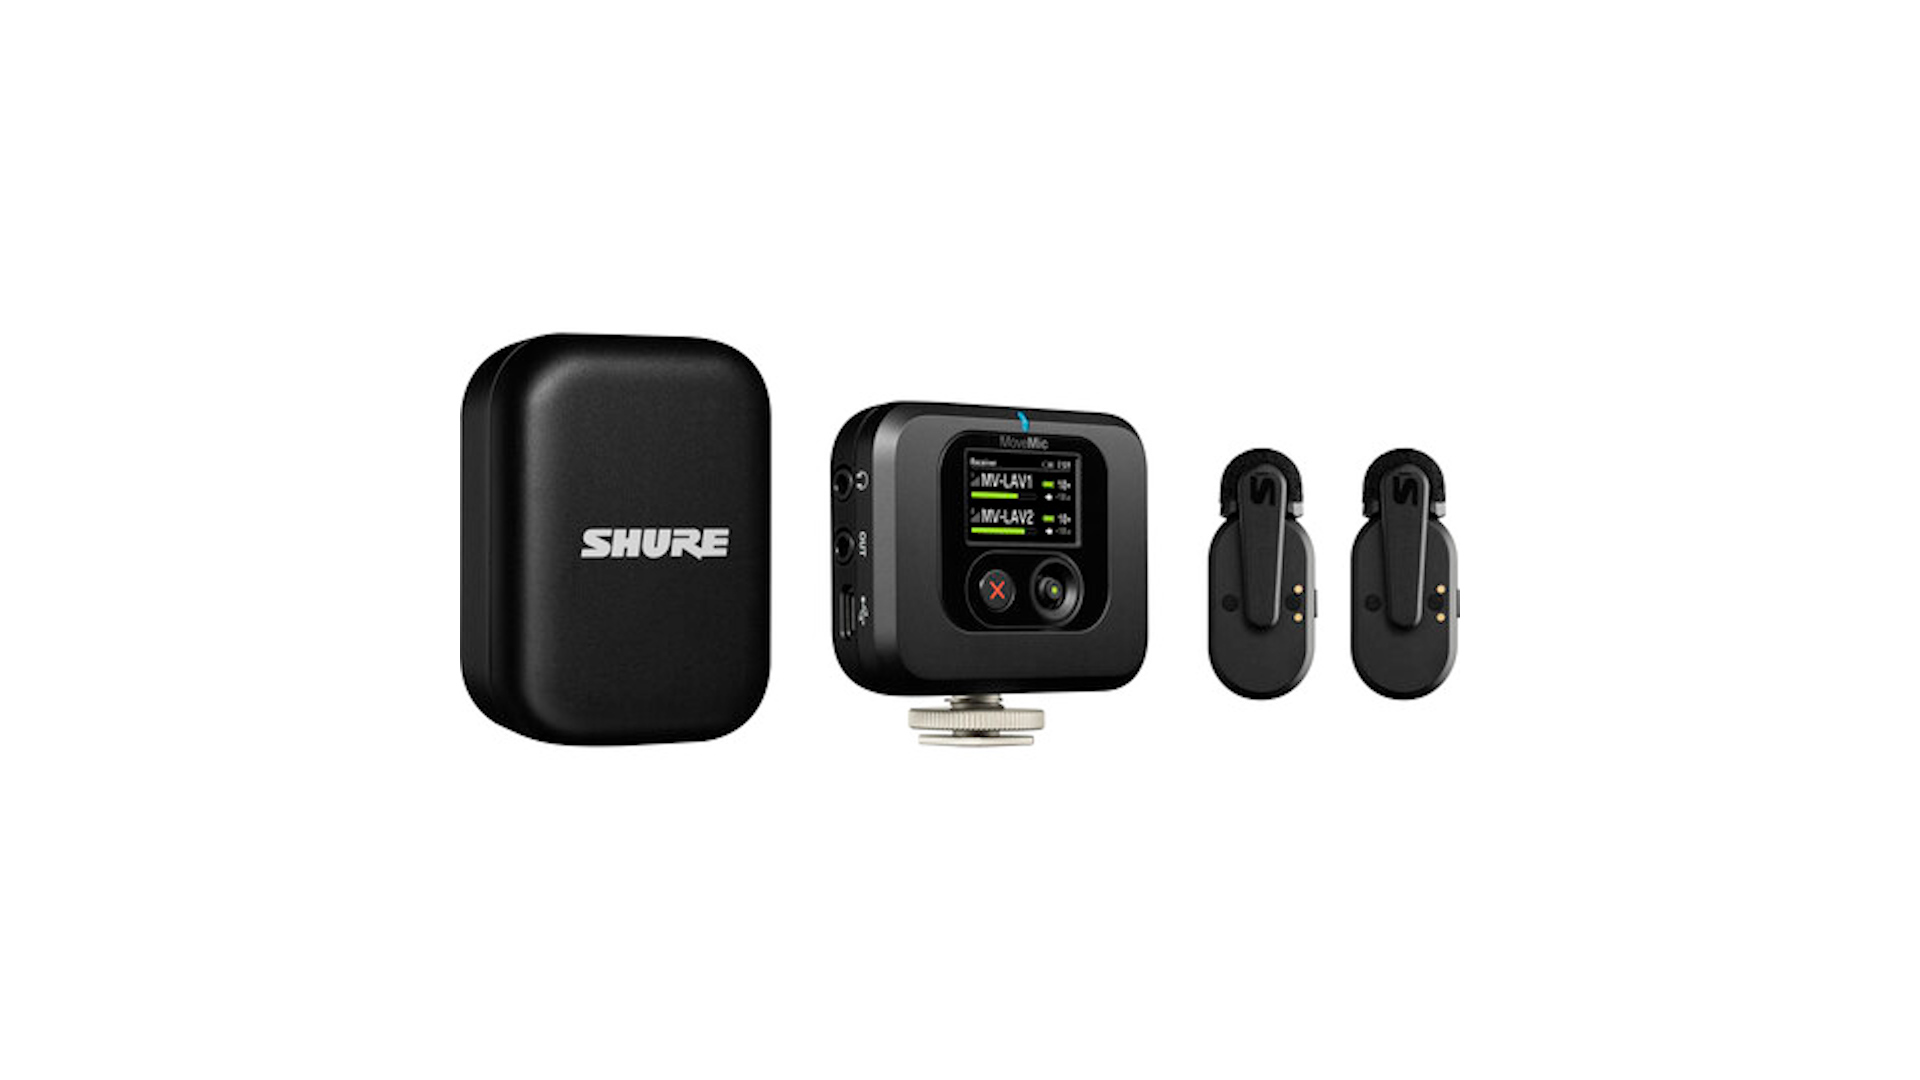 Shure MoveMic Announced – Wireless Microphone System for Mobile Devices and Cameras